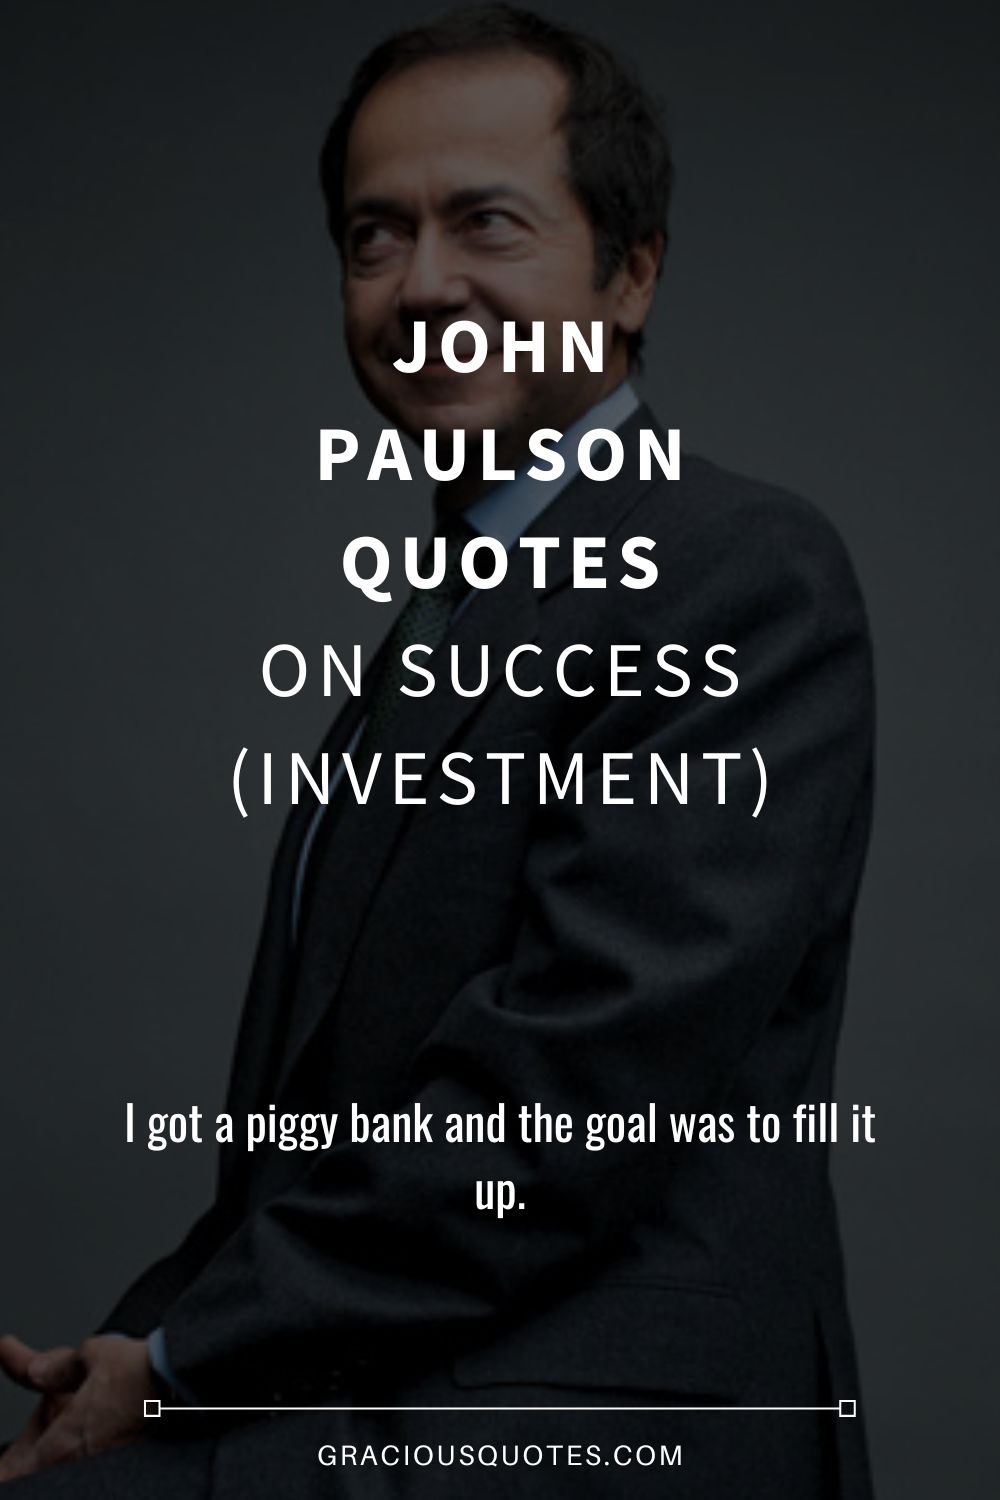 John Paulson Quotes on Success (INVESTMENT) - Gracious Quotes